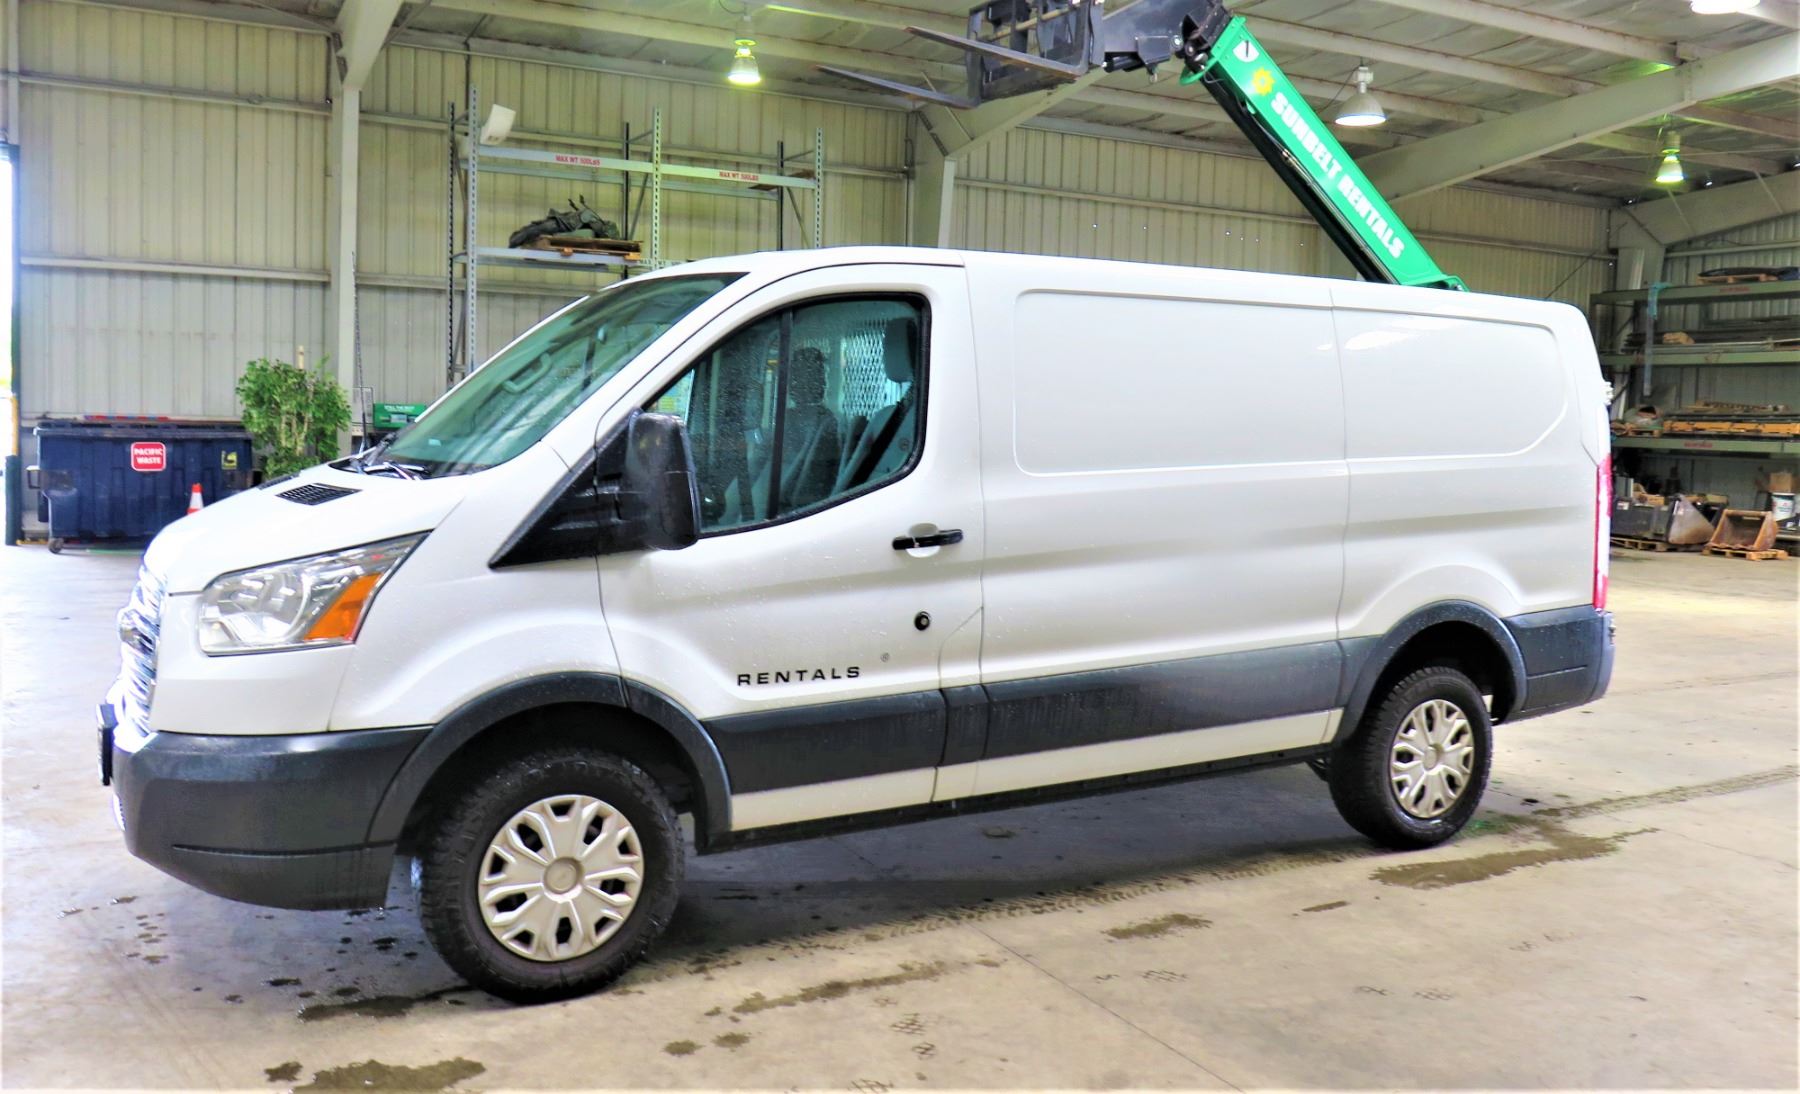 2015 Ford Transit 250 Cargo Van, 67848 Miles, Lic. 972HDX (Runs, Drives,  See Video) - Oahu Auctions